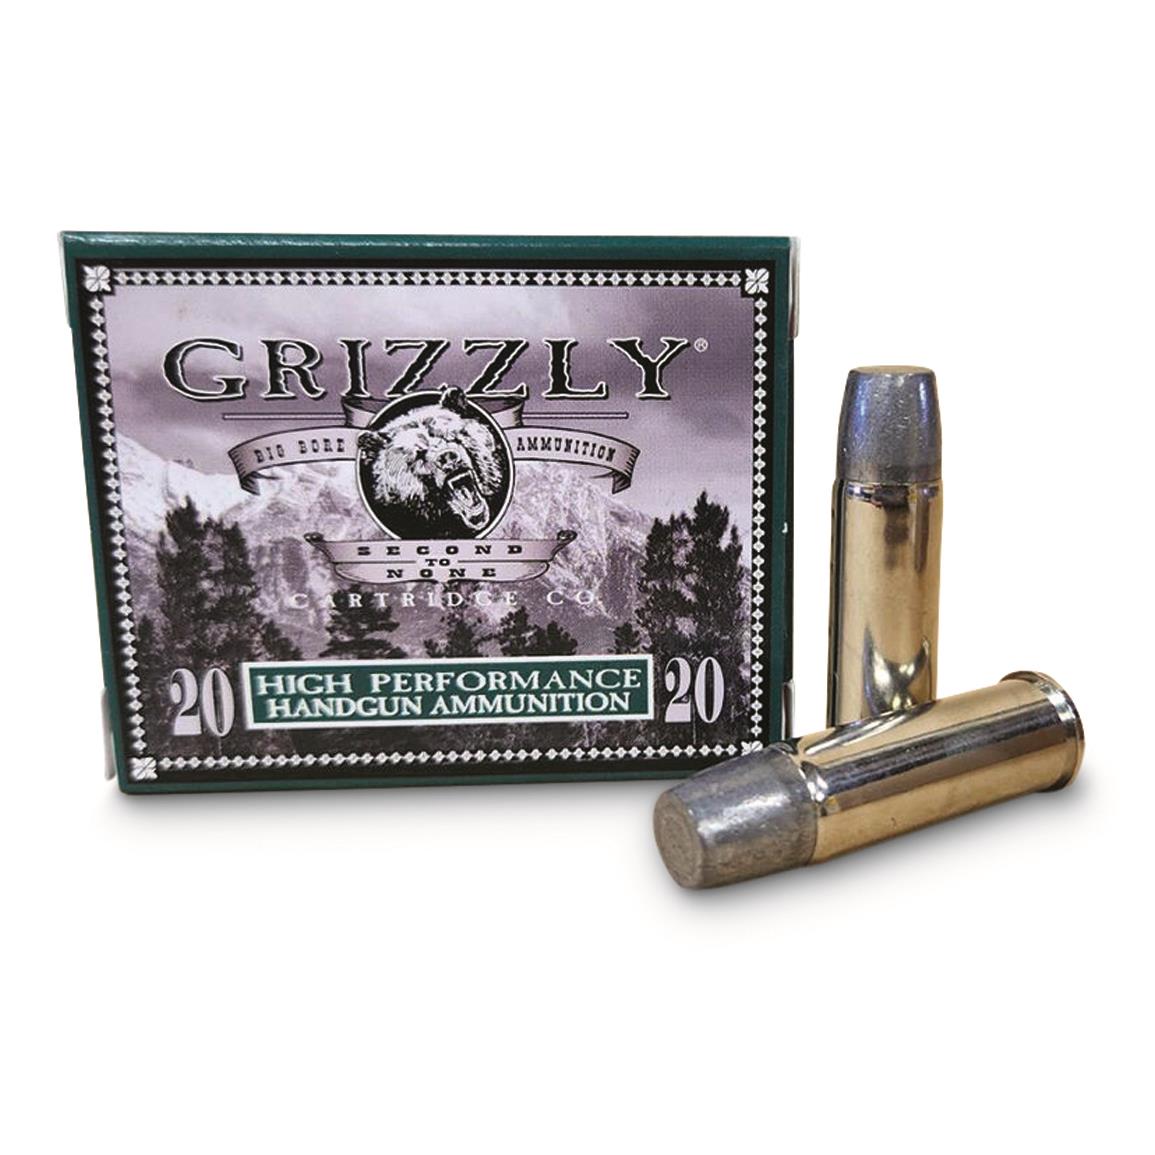 Grizzly Cartridge Co. High Performance Handgun, .44 Magnum, WLNGC, 320 Grain, 20 Rounds